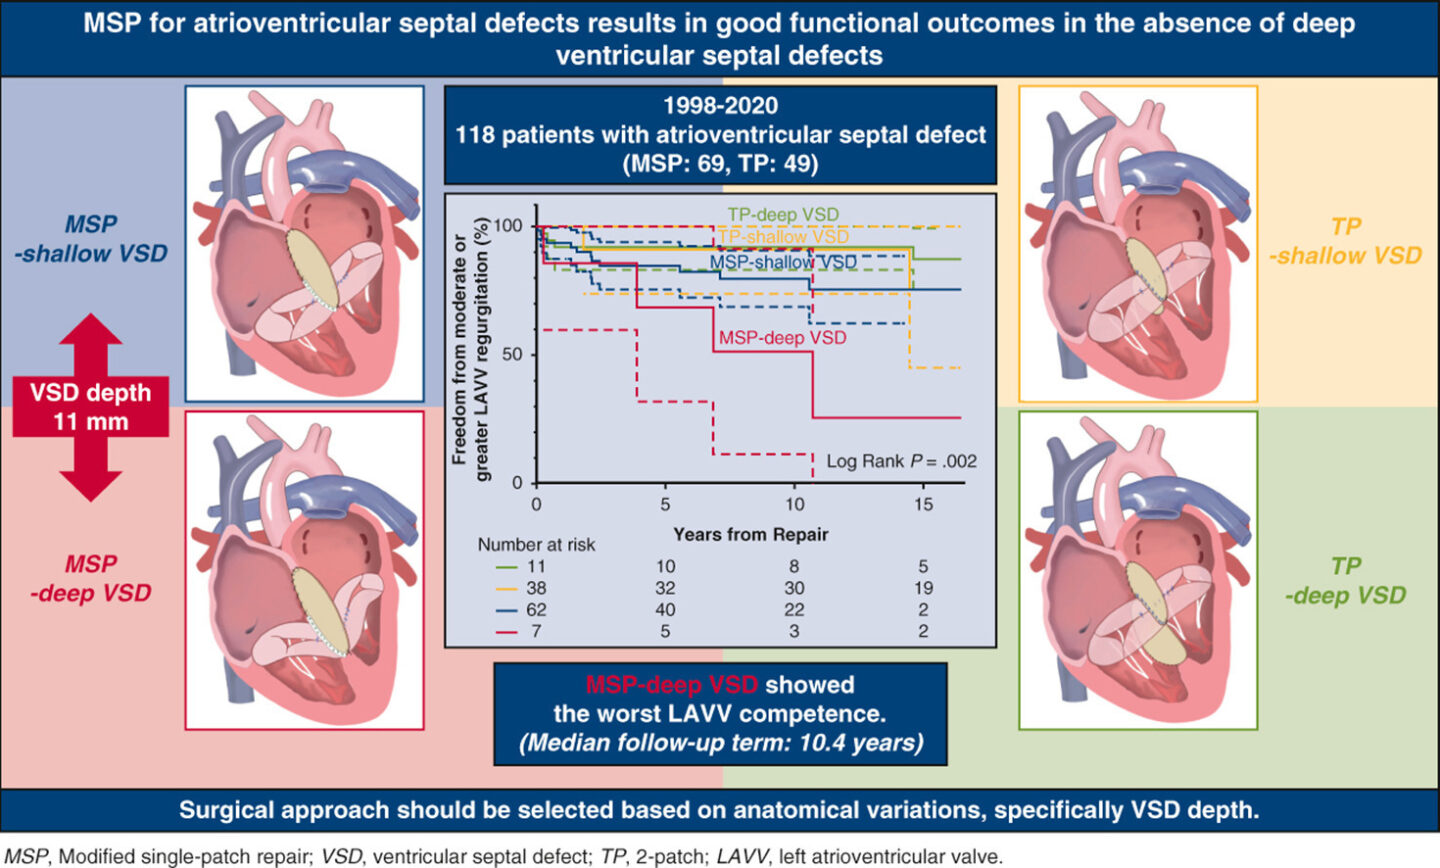 Modified single-patch repair for atrioventricular septal defects results in good functional outcomes in the absence of deep ventricular septal defects